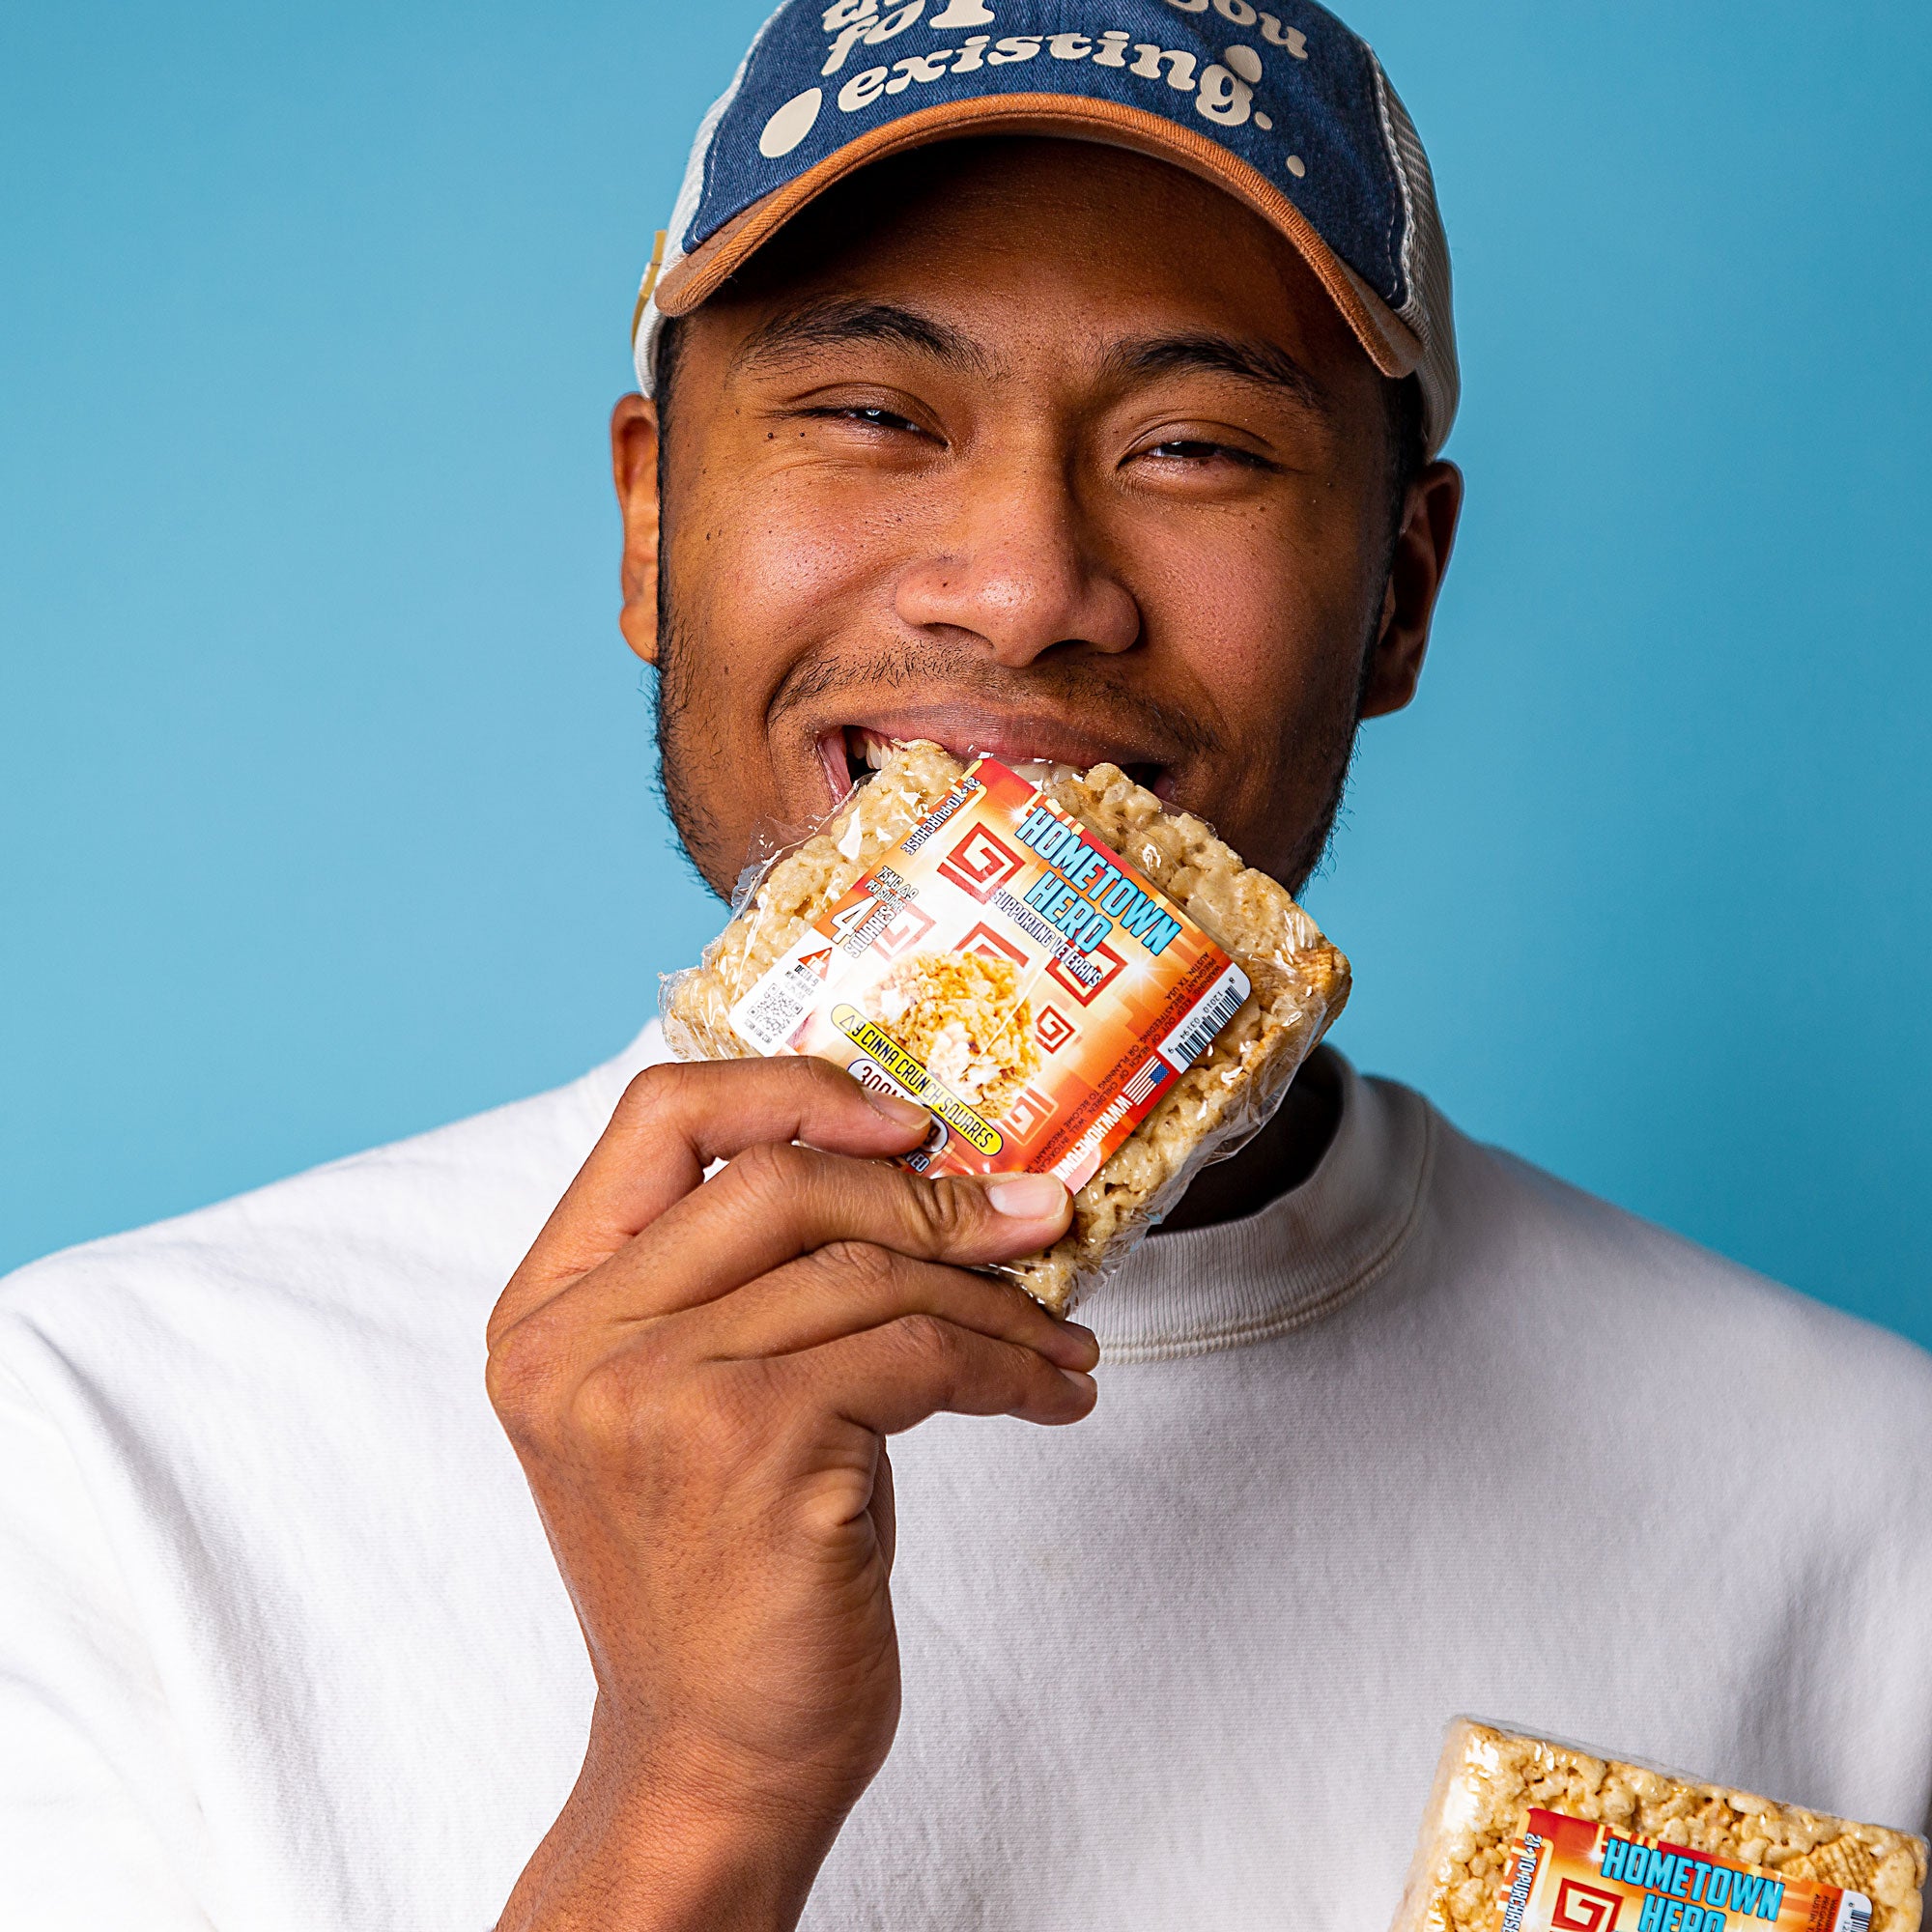 Delta 9 THC Cinna Crunch Edible with Model eating